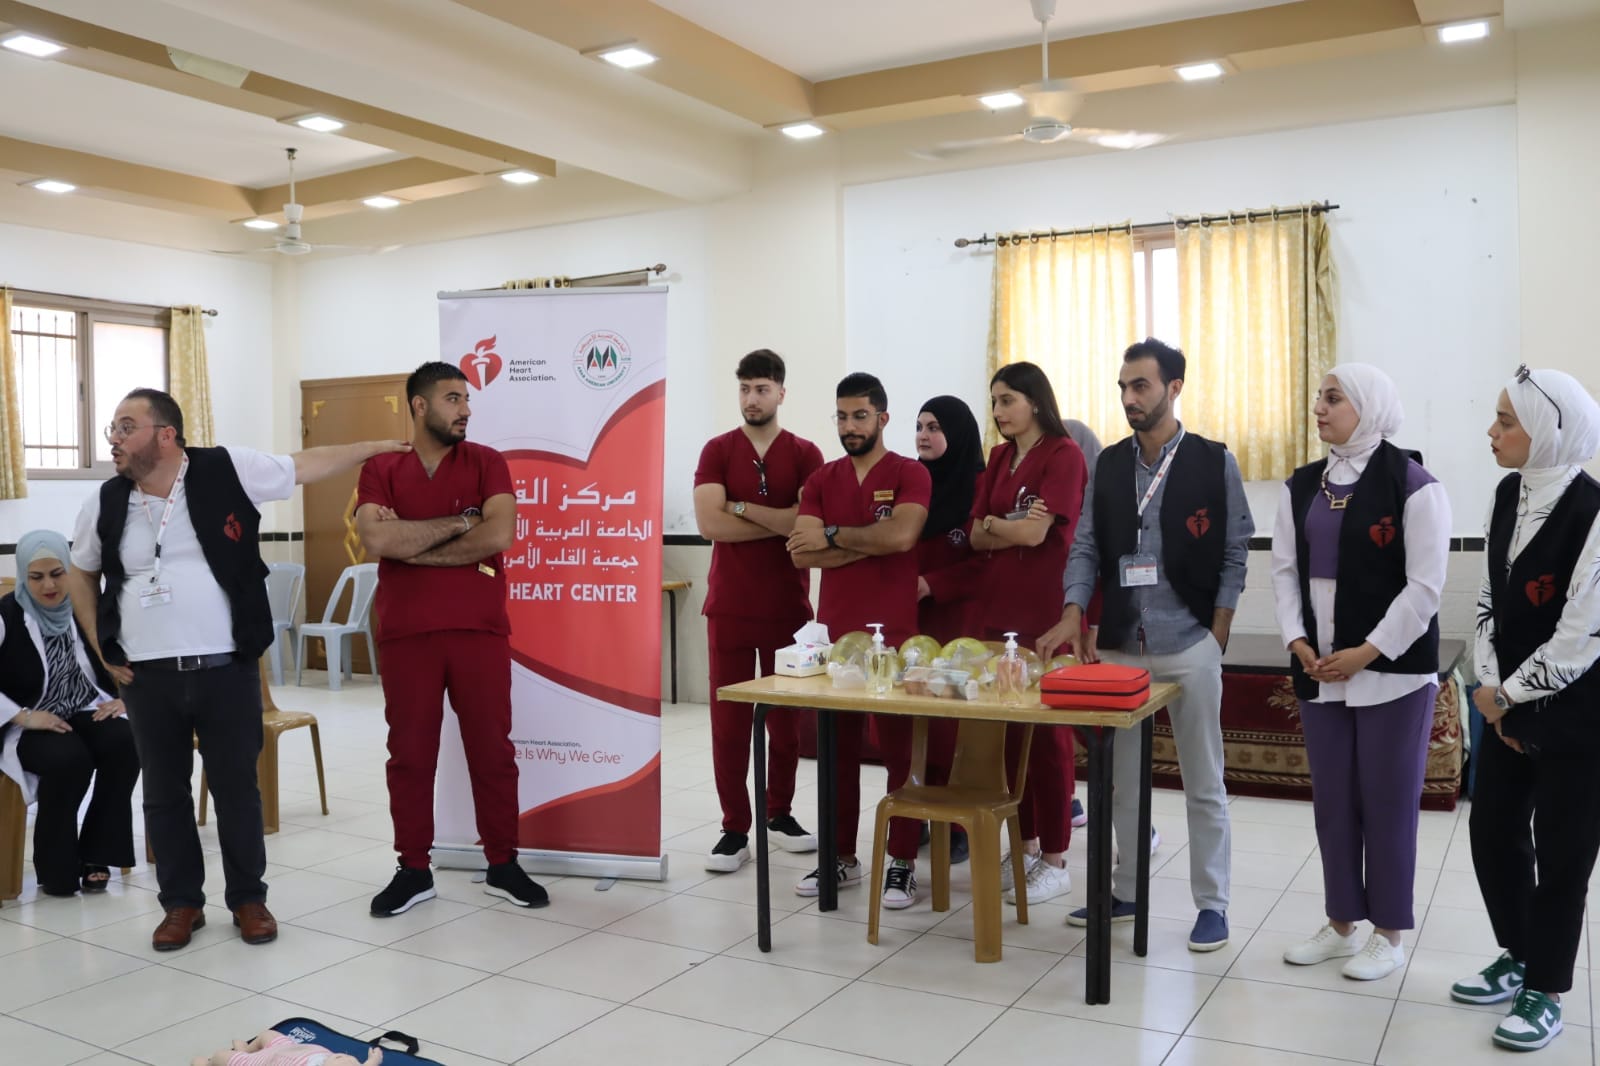 The Heart Center at the University Holds a Training Course Entitled: "Cardiopulmonary Resuscitation and Basic Life Support"